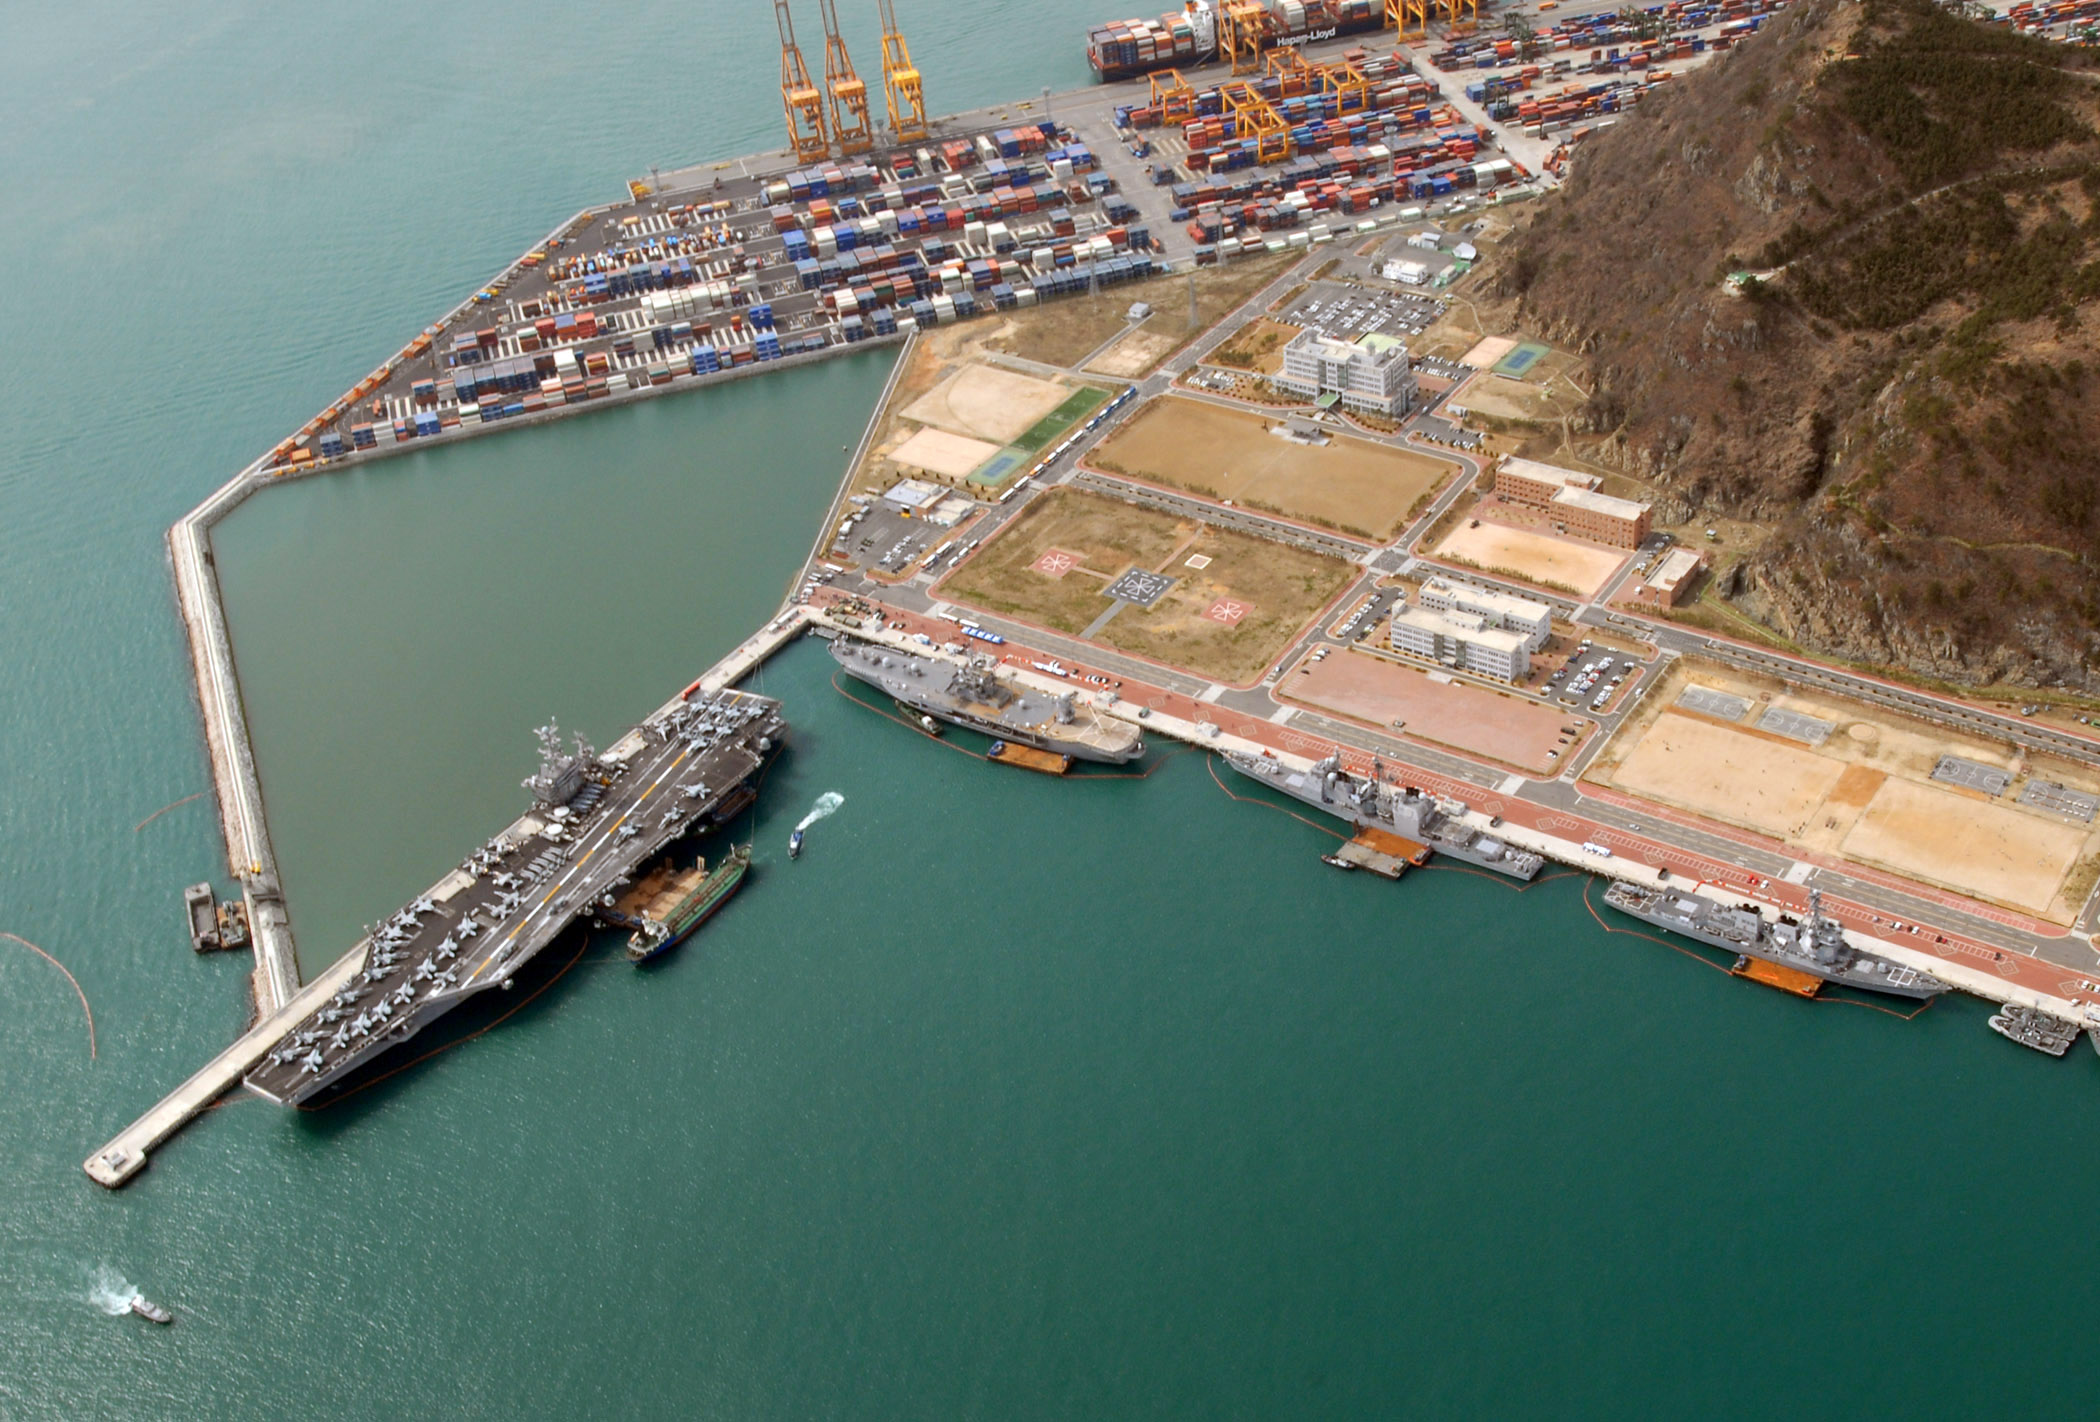 an aerial view of a large ship docked in the harbor